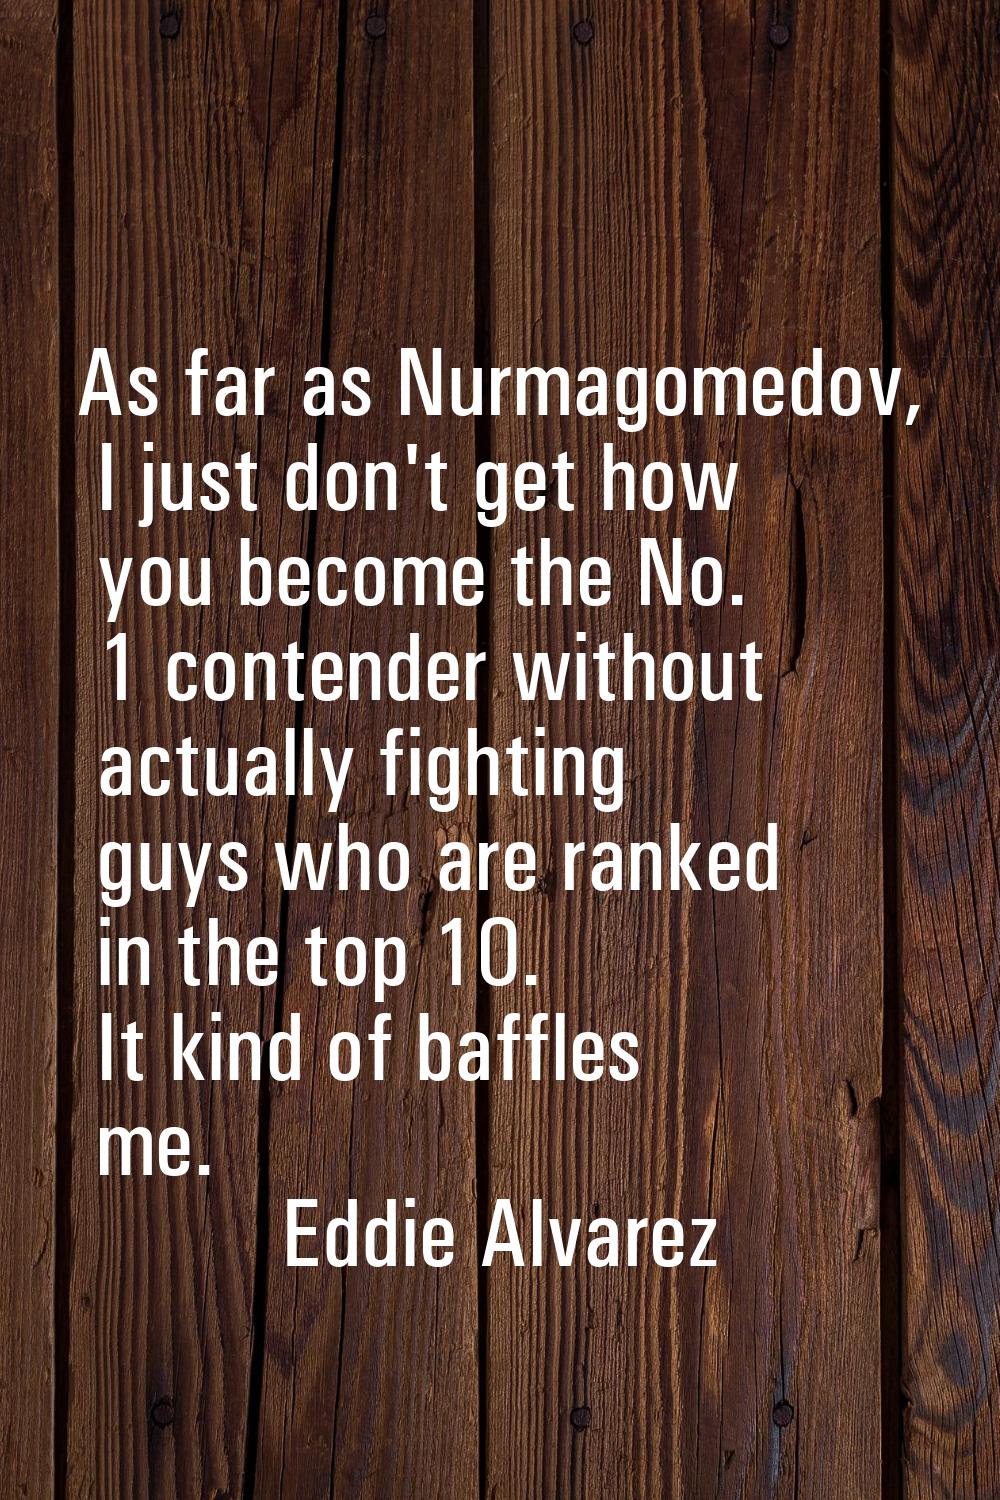 As far as Nurmagomedov, I just don't get how you become the No. 1 contender without actually fighti